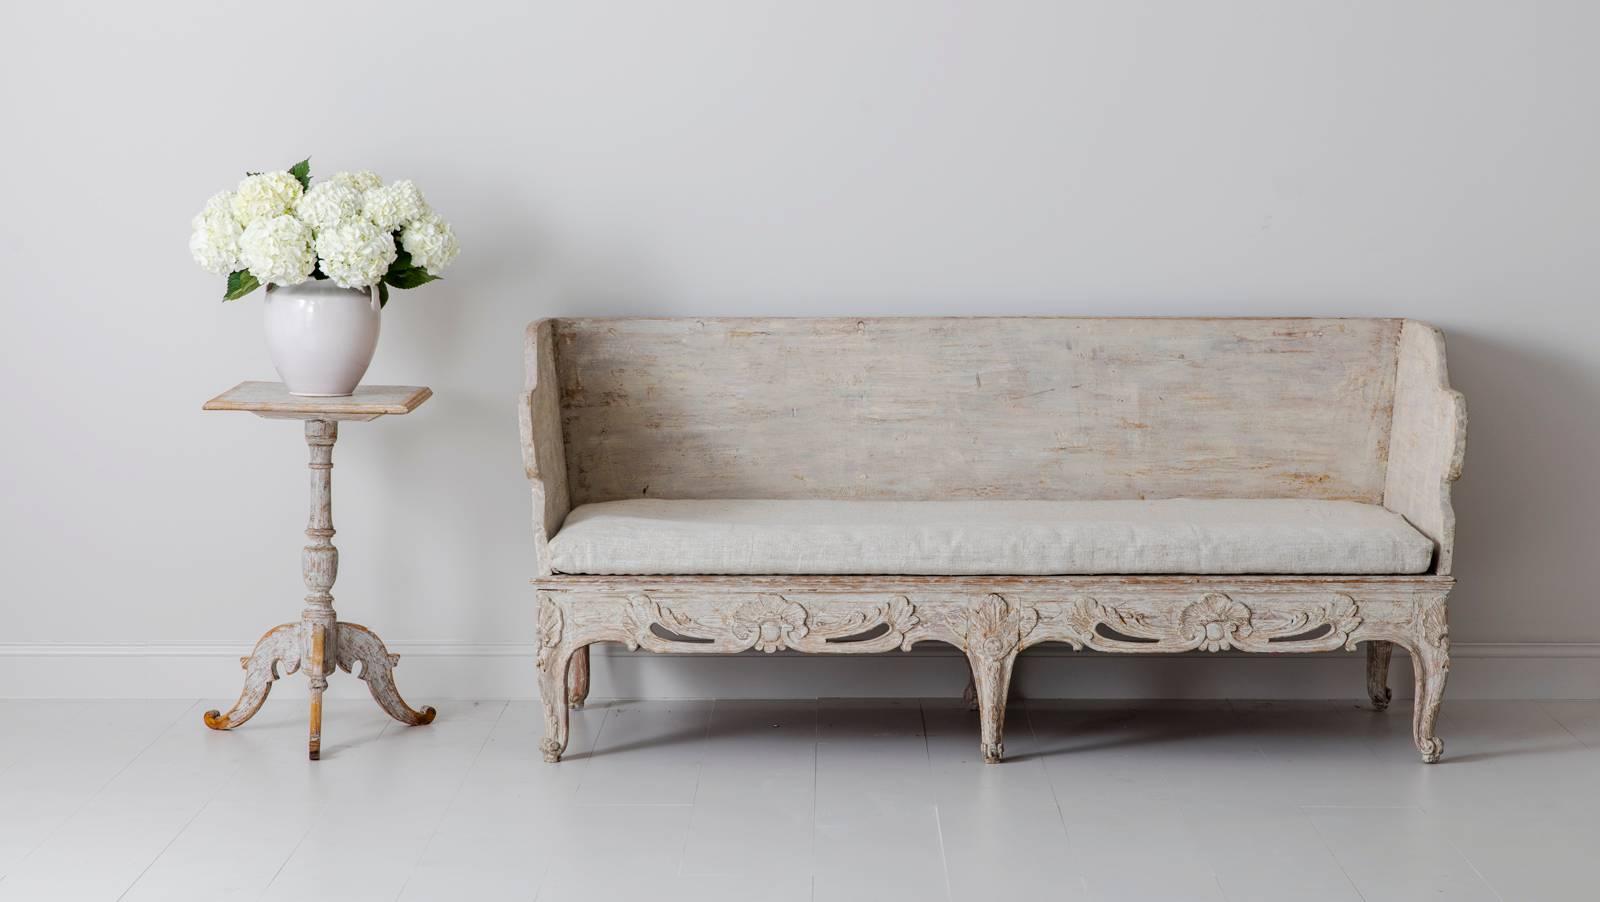 An 18th century Swedish (Trågsoffa) from the Rococo period with original linen seat, back, and side cushions. This is an exceptional and rare period piece that was purchased from a private collection in Belgium. It has been hand-scraped back to